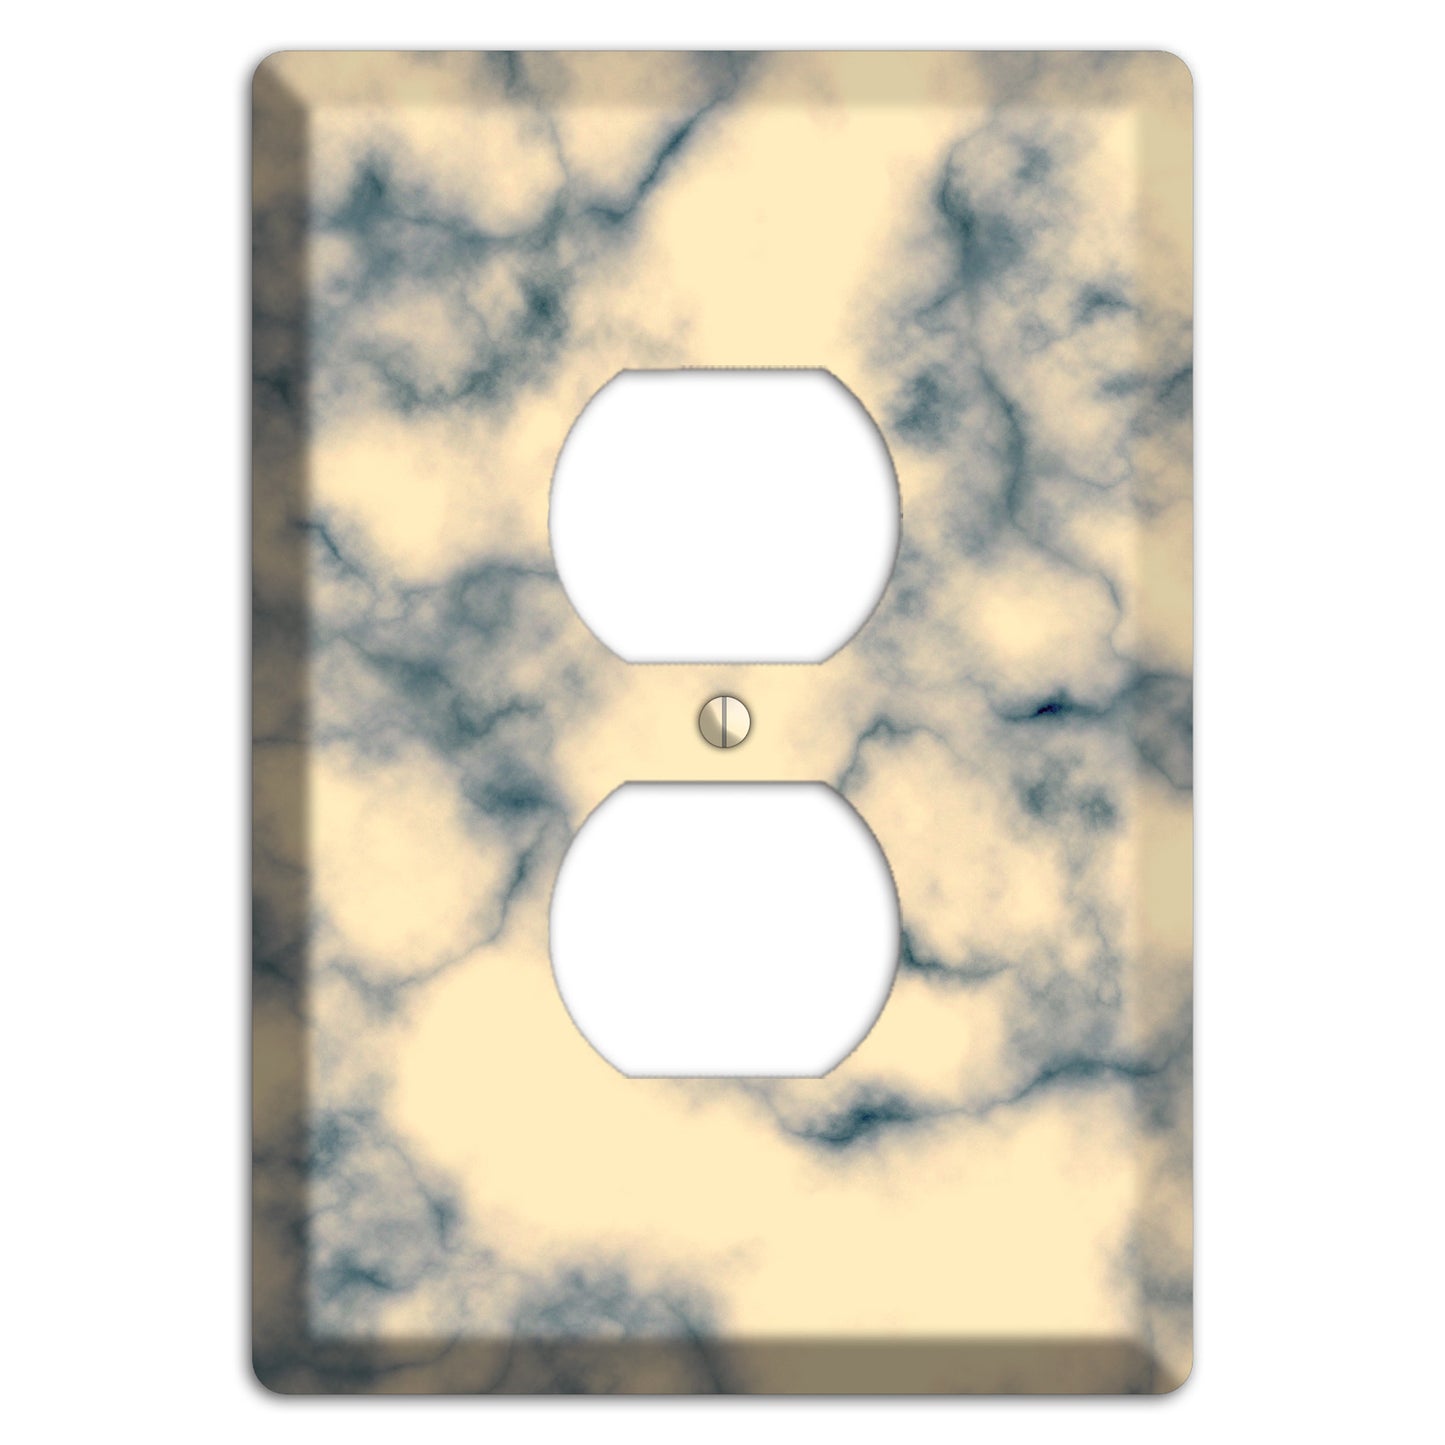 Mantle Marble Duplex Outlet Wallplate